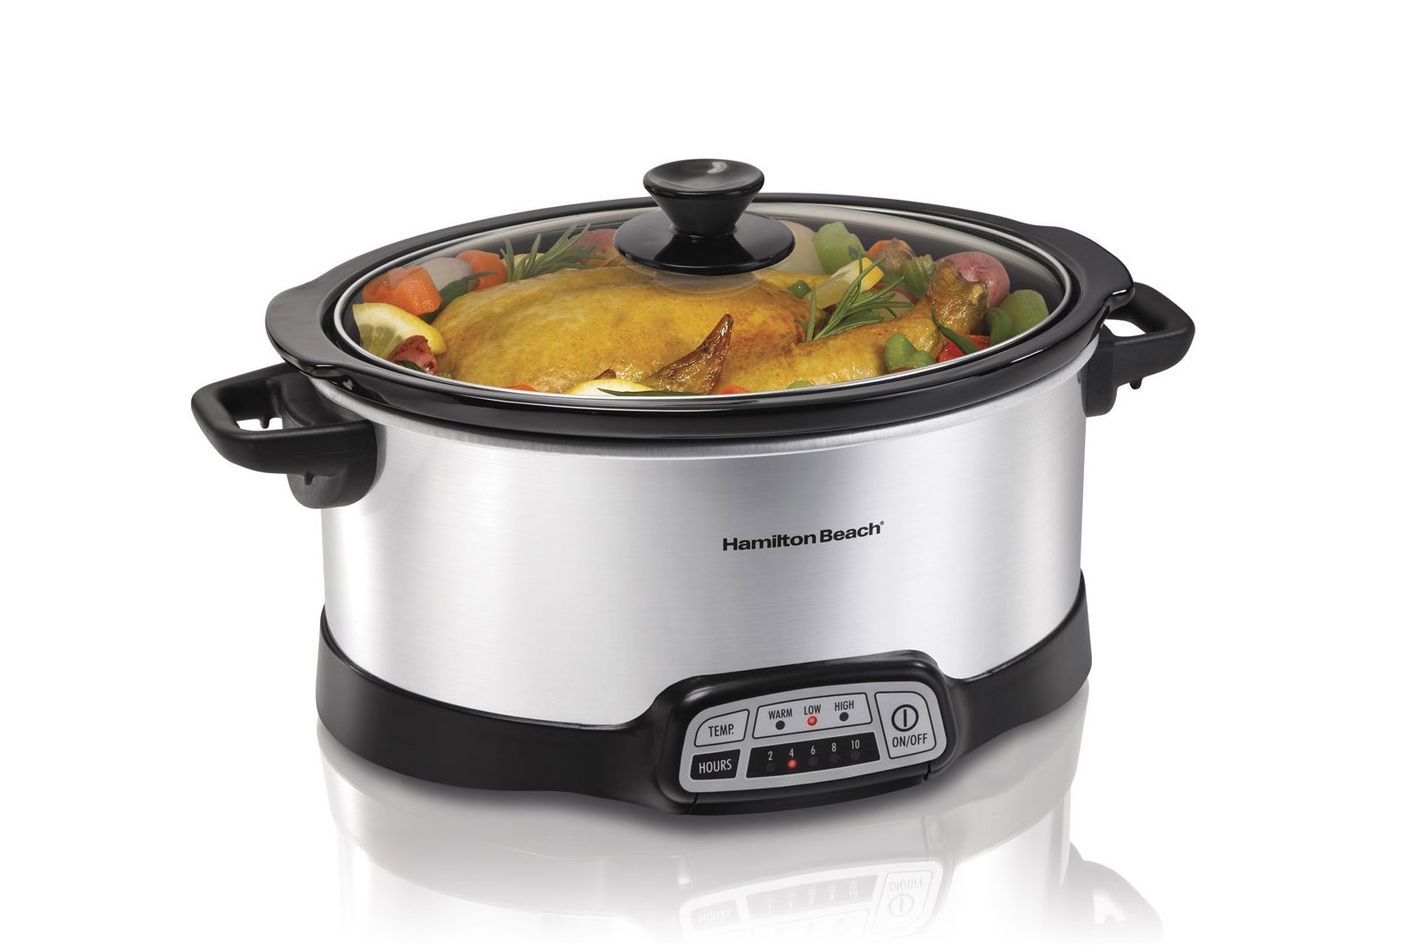 The Best Slow Cookers of 2023, According to Experts